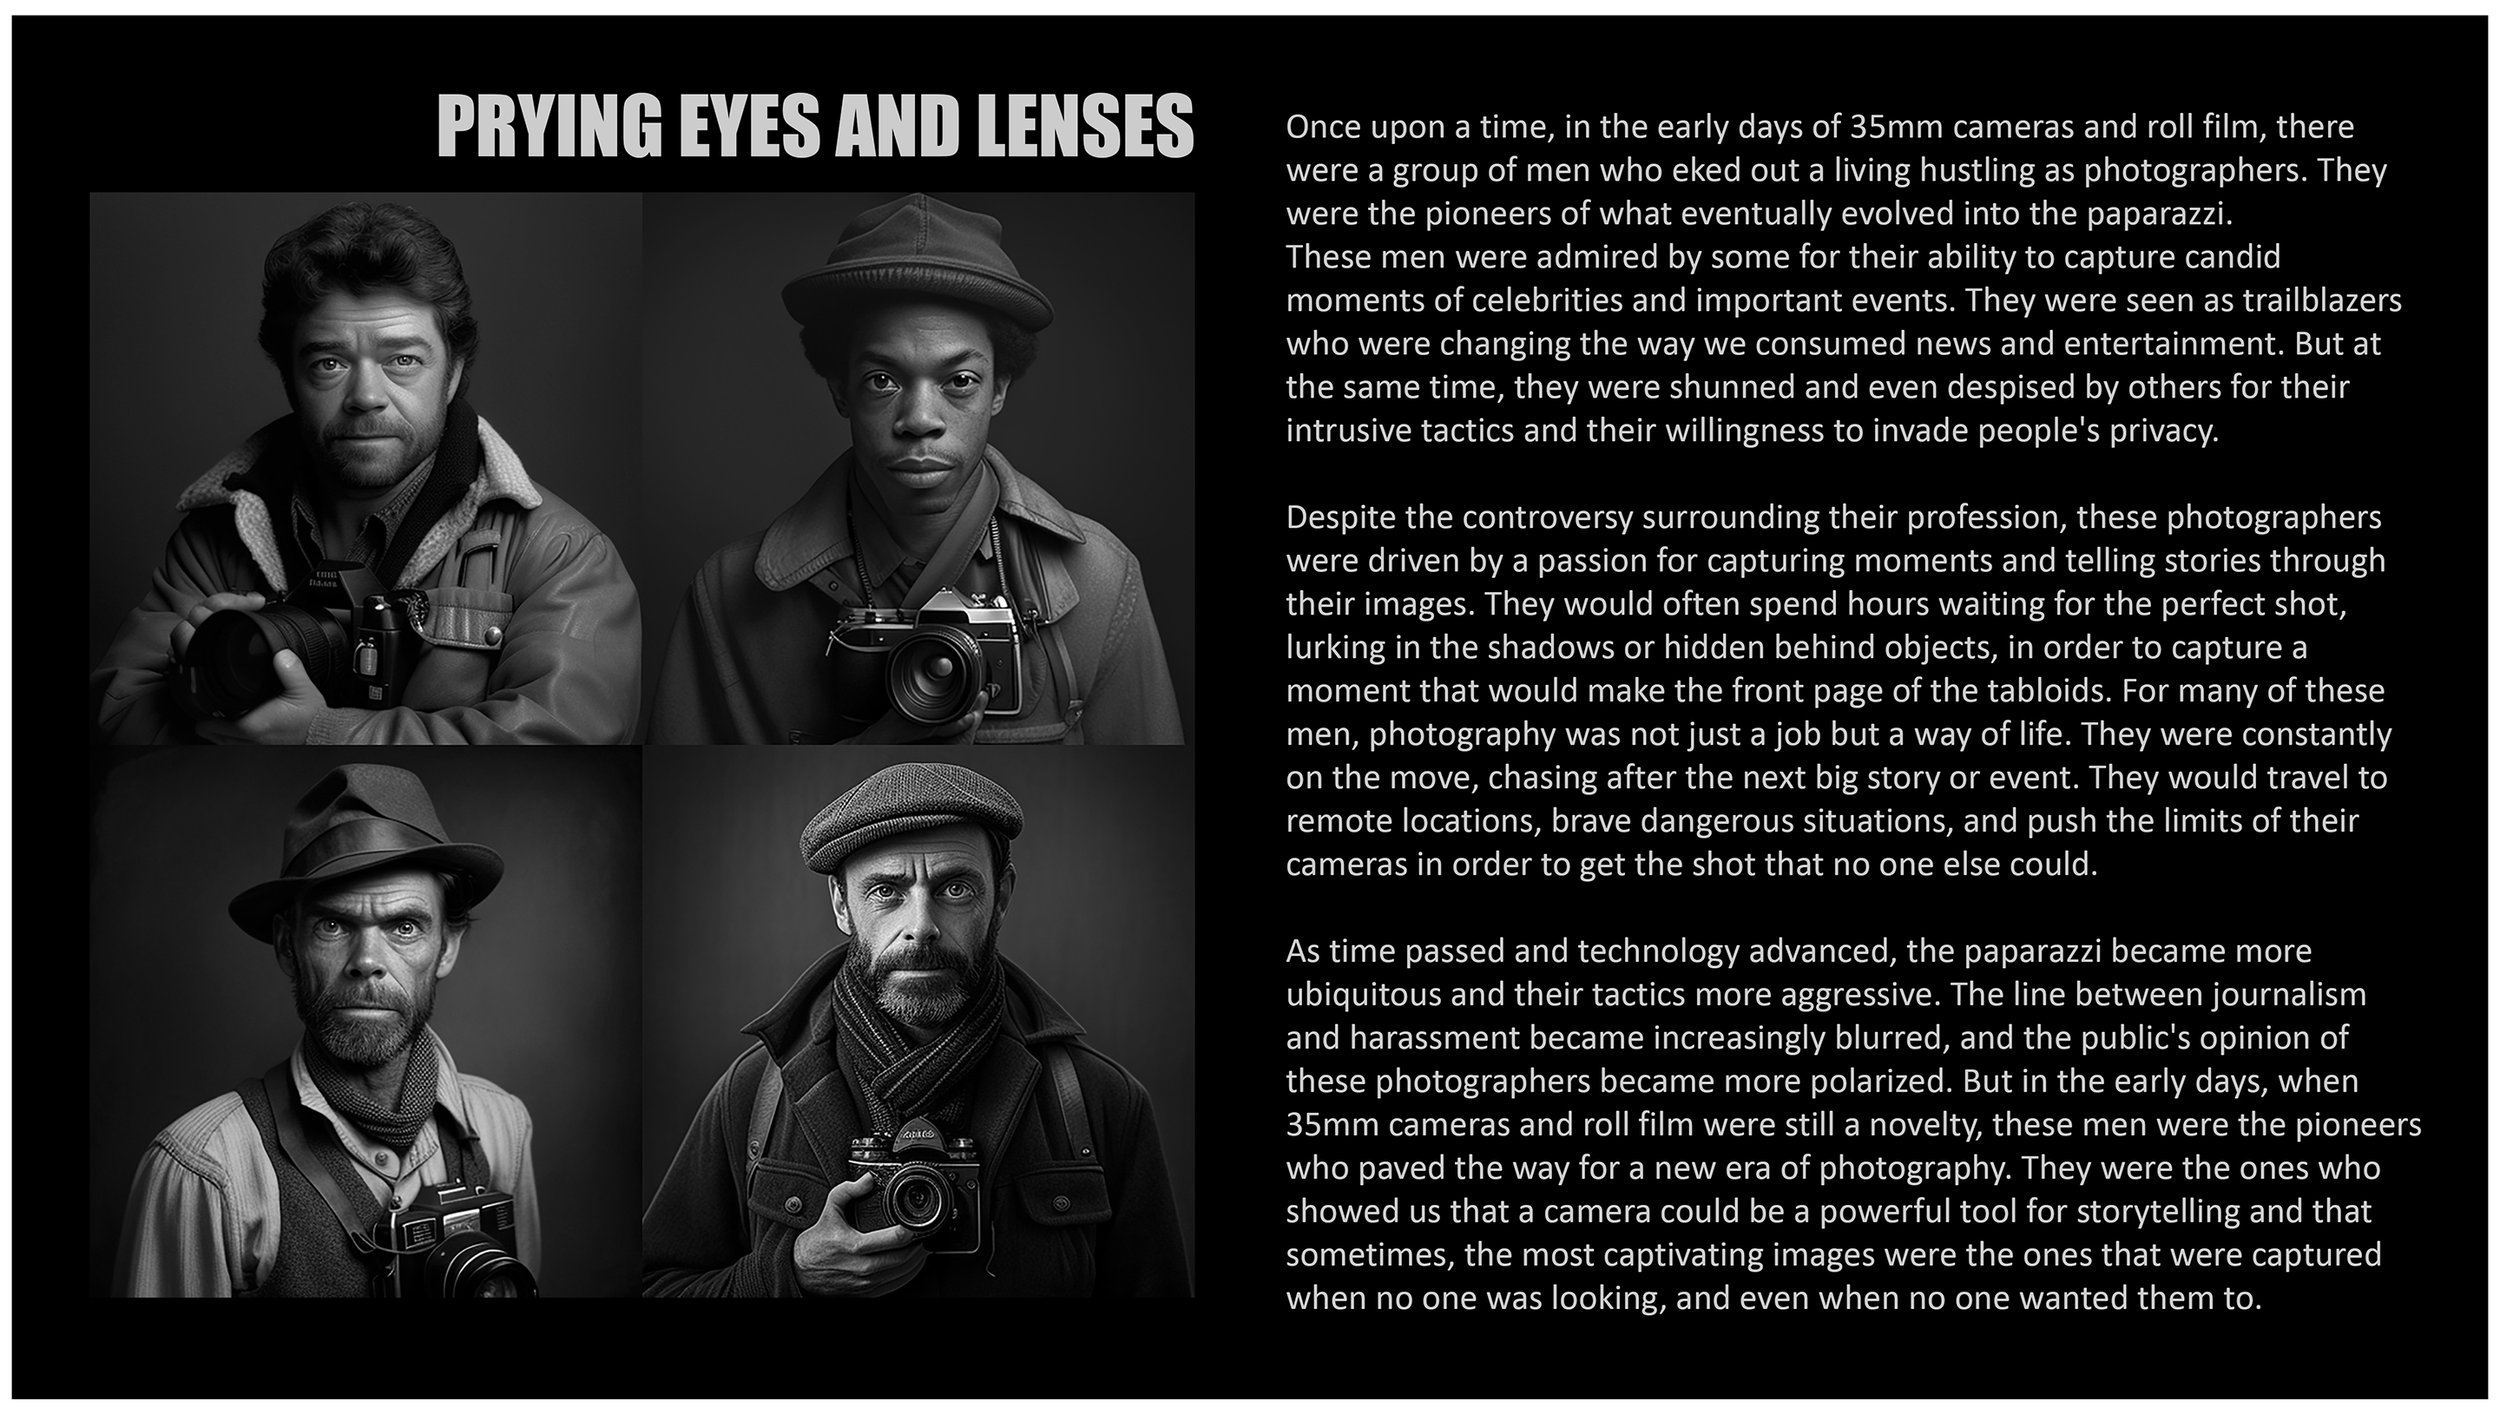 Prying Eyes and Lenses